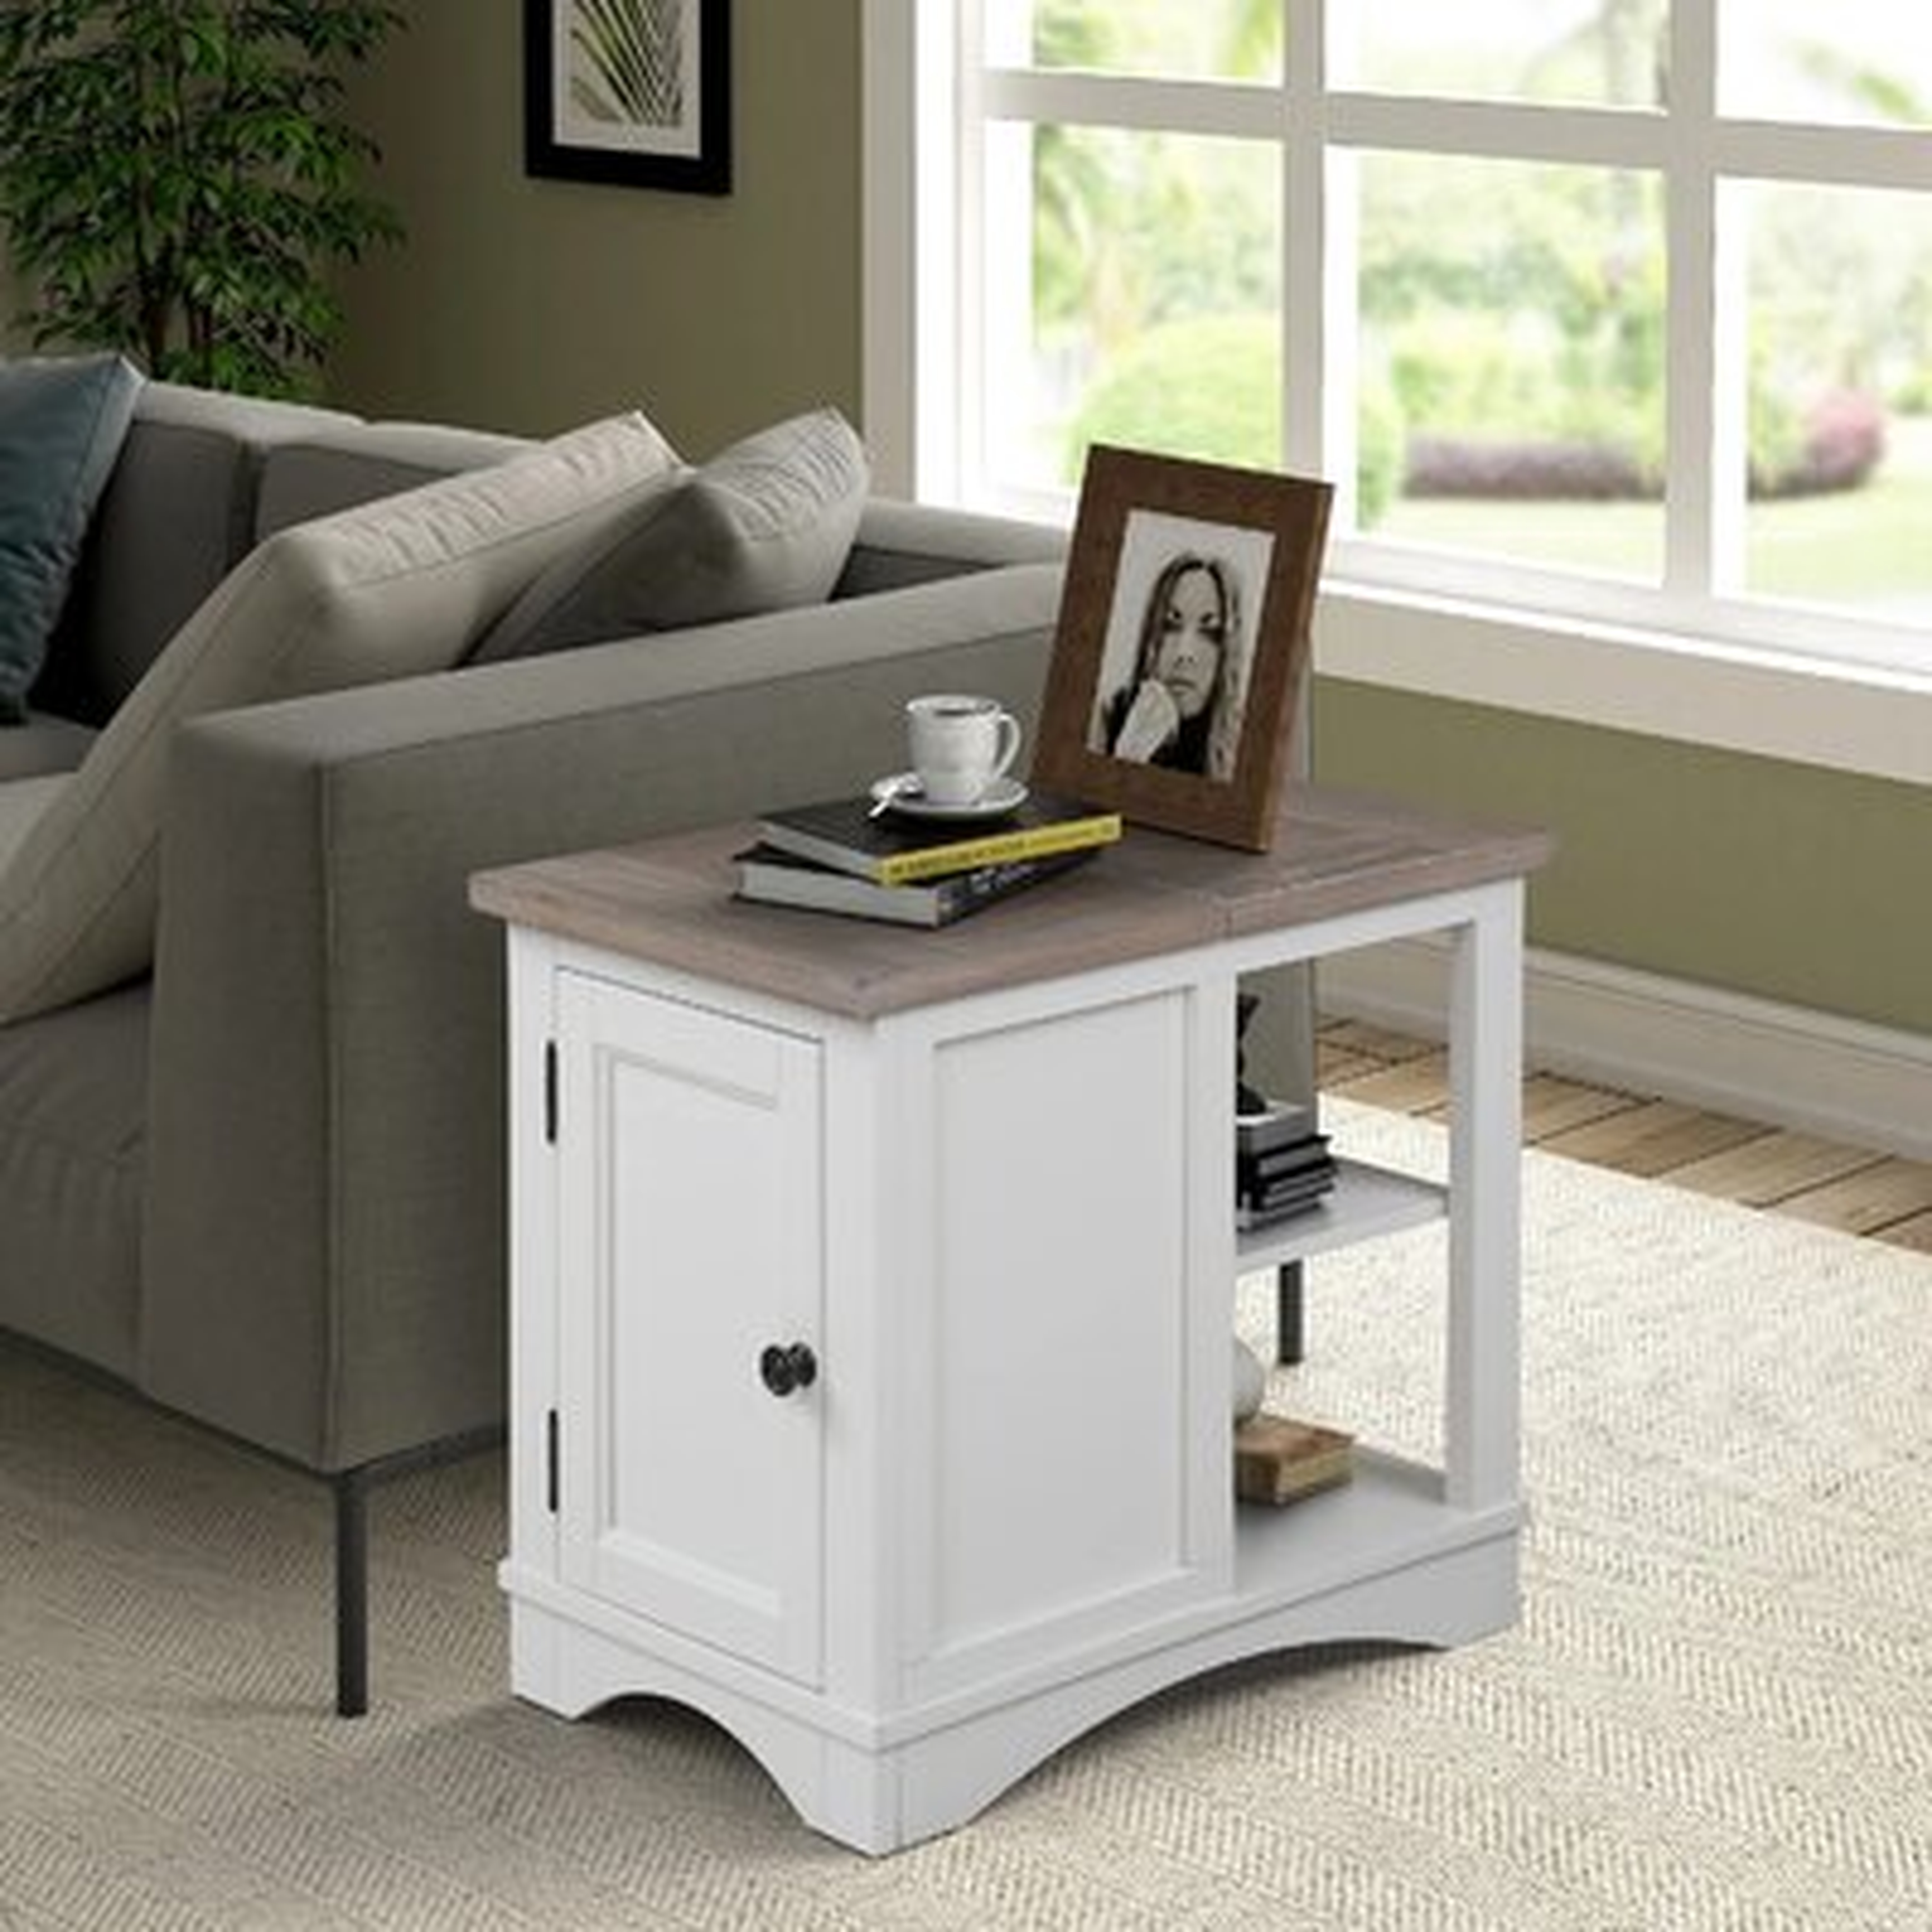 Hinson End Table with Storage - Wayfair